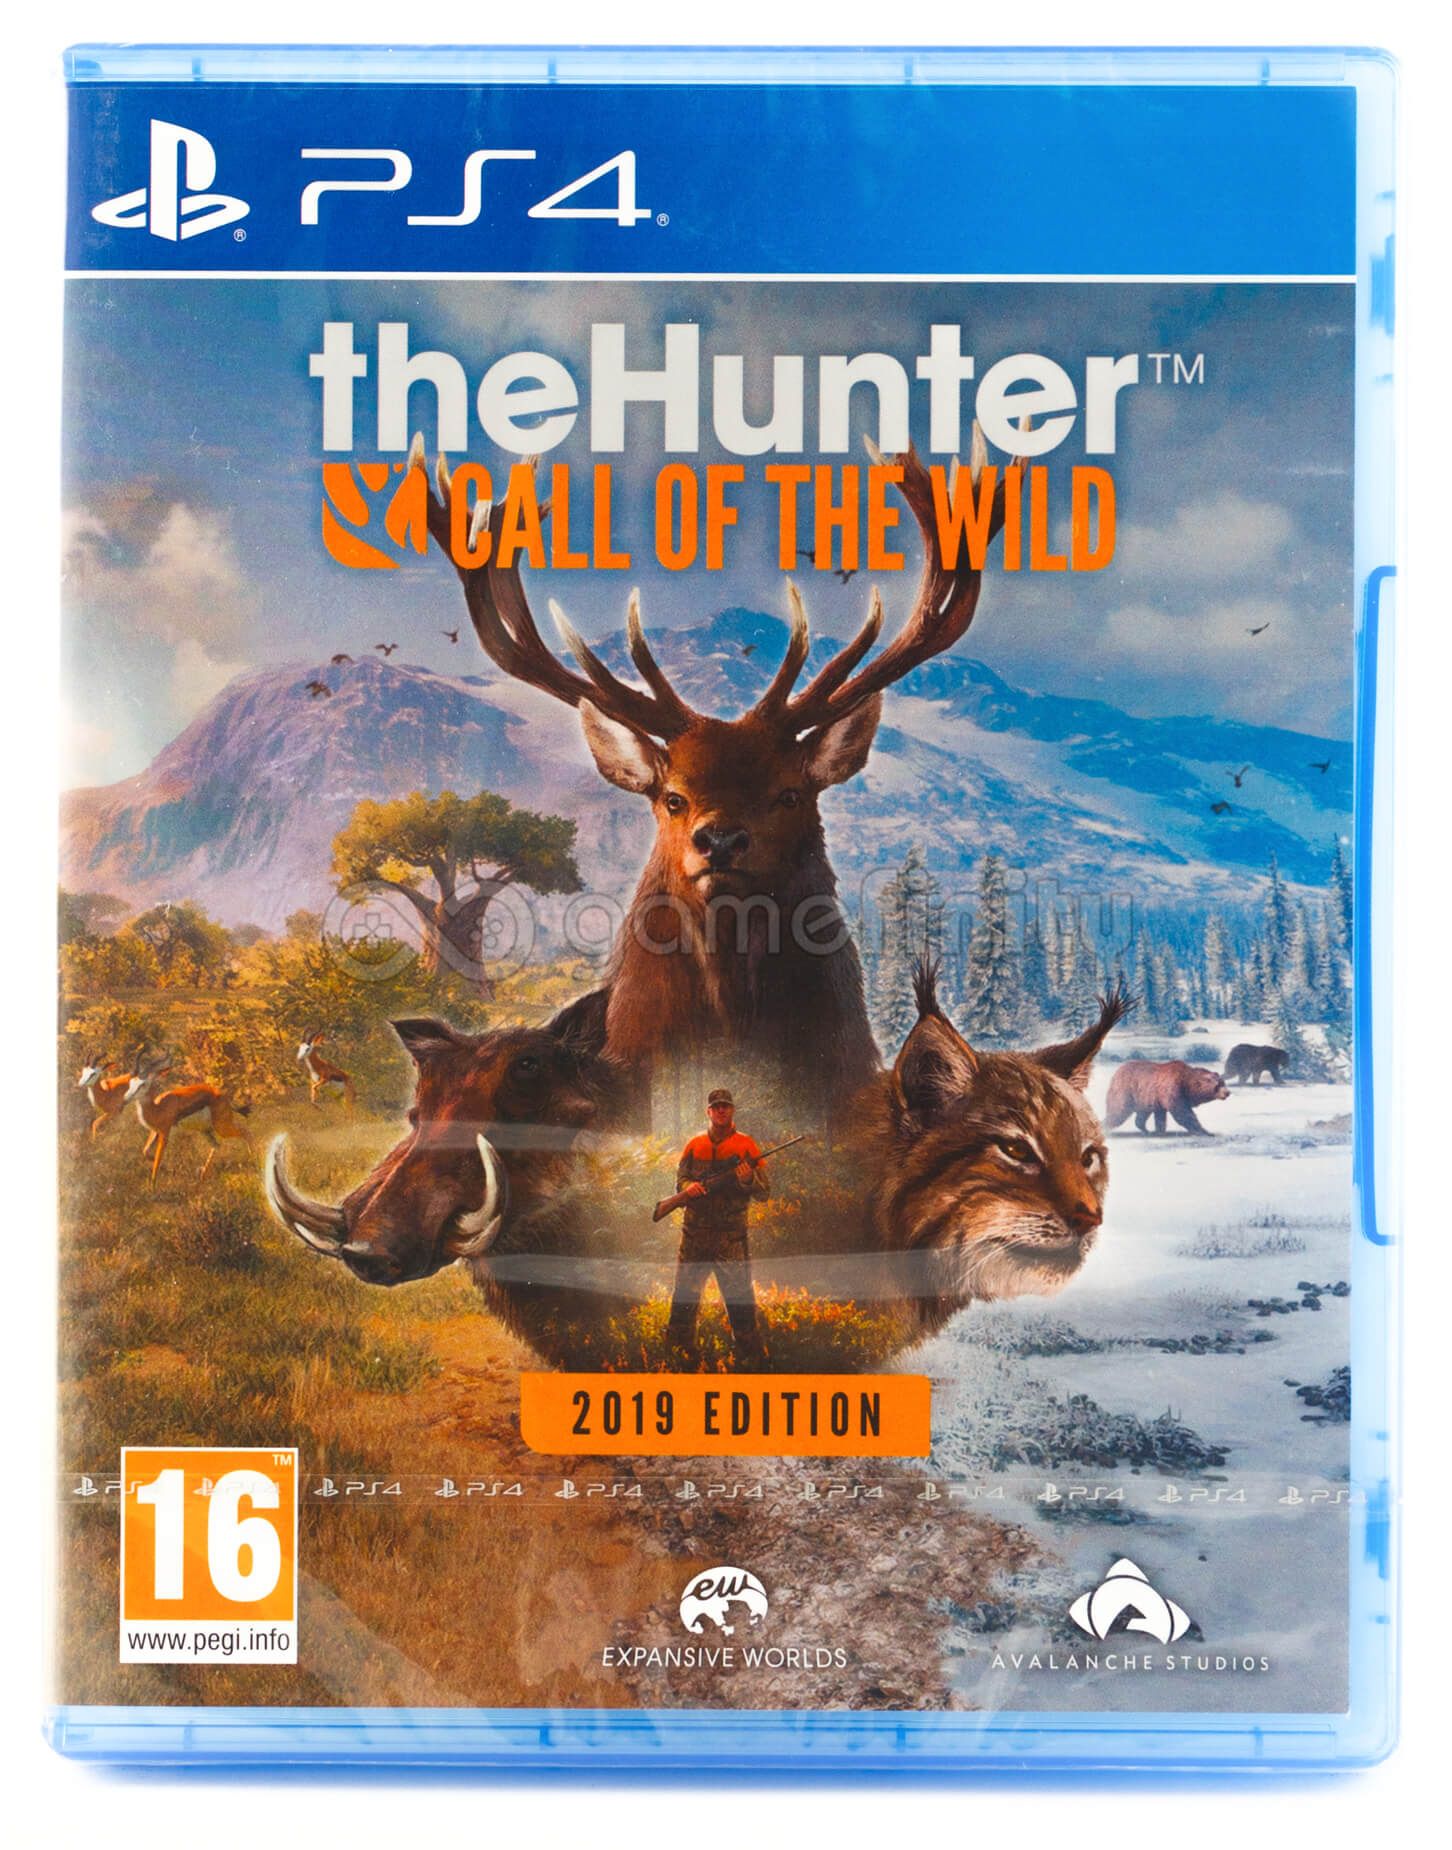 The Hunter Call of the Wild ps4. The Hunter Call of the Wild обложка. Диск the Hunter Call of the Wild ps4 обзор. The Hunter Call of the Wild купить.